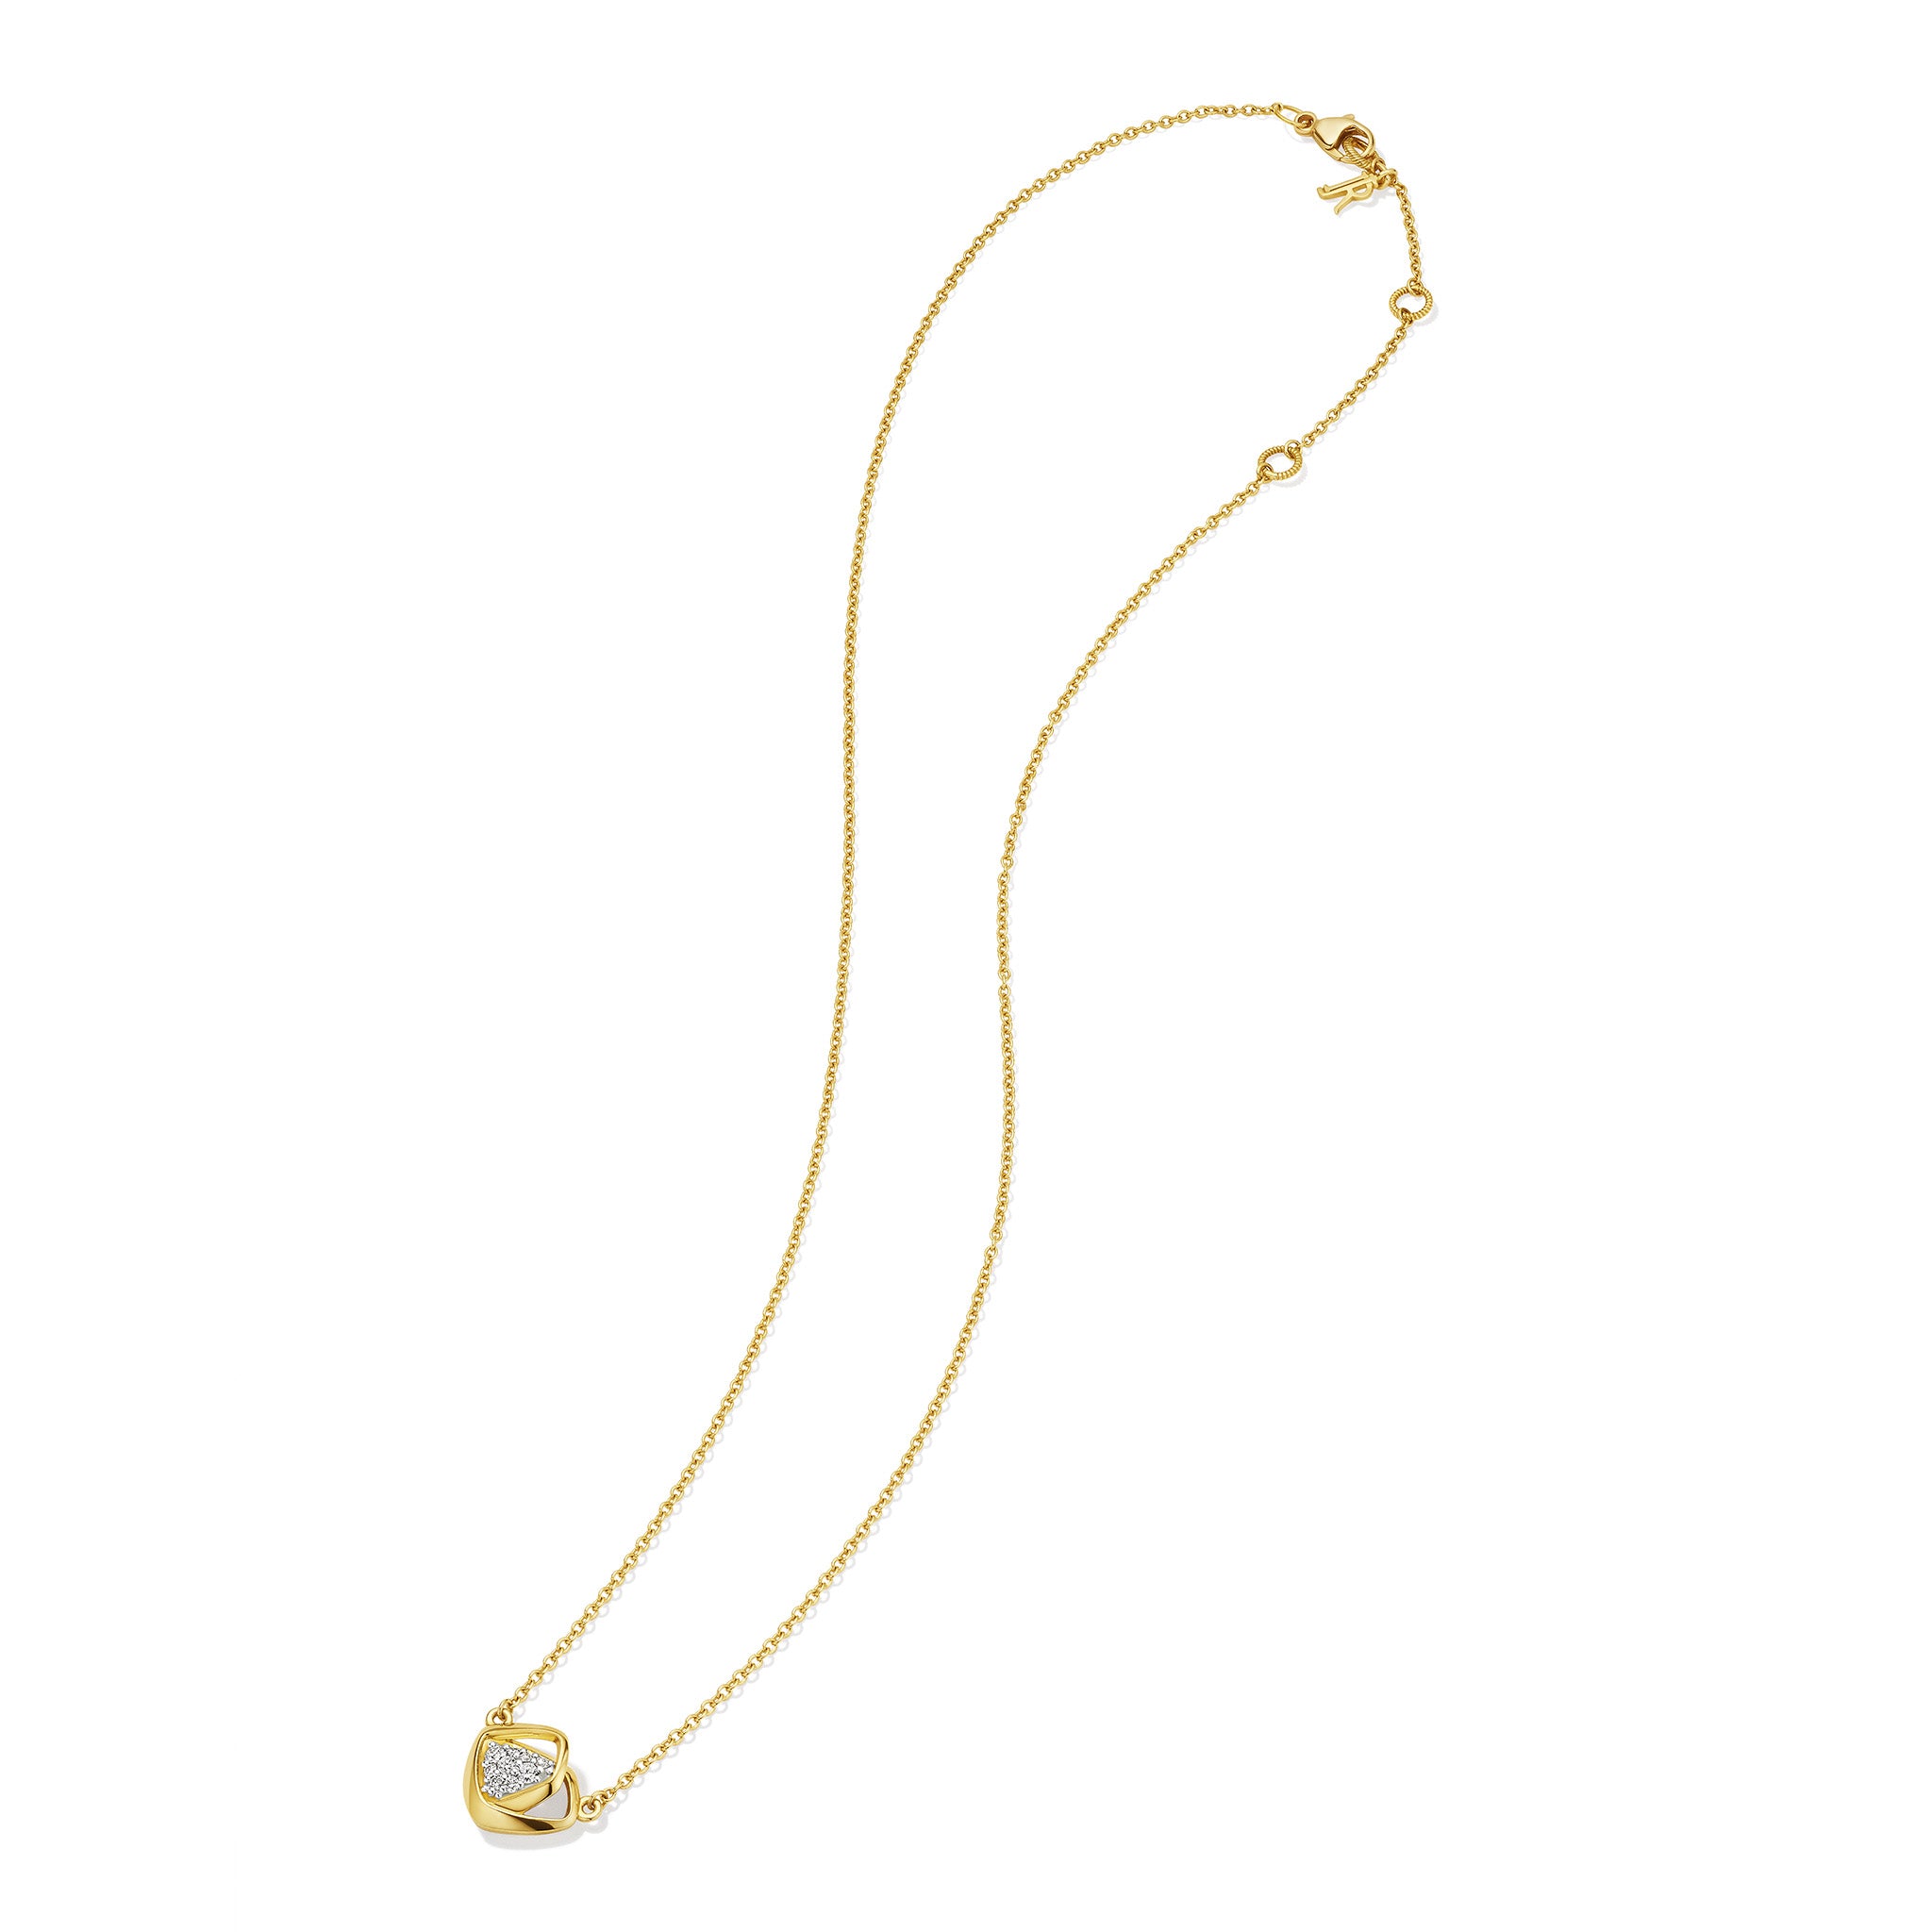 Selvaggia Pendant Necklace with Diamonds in 14K